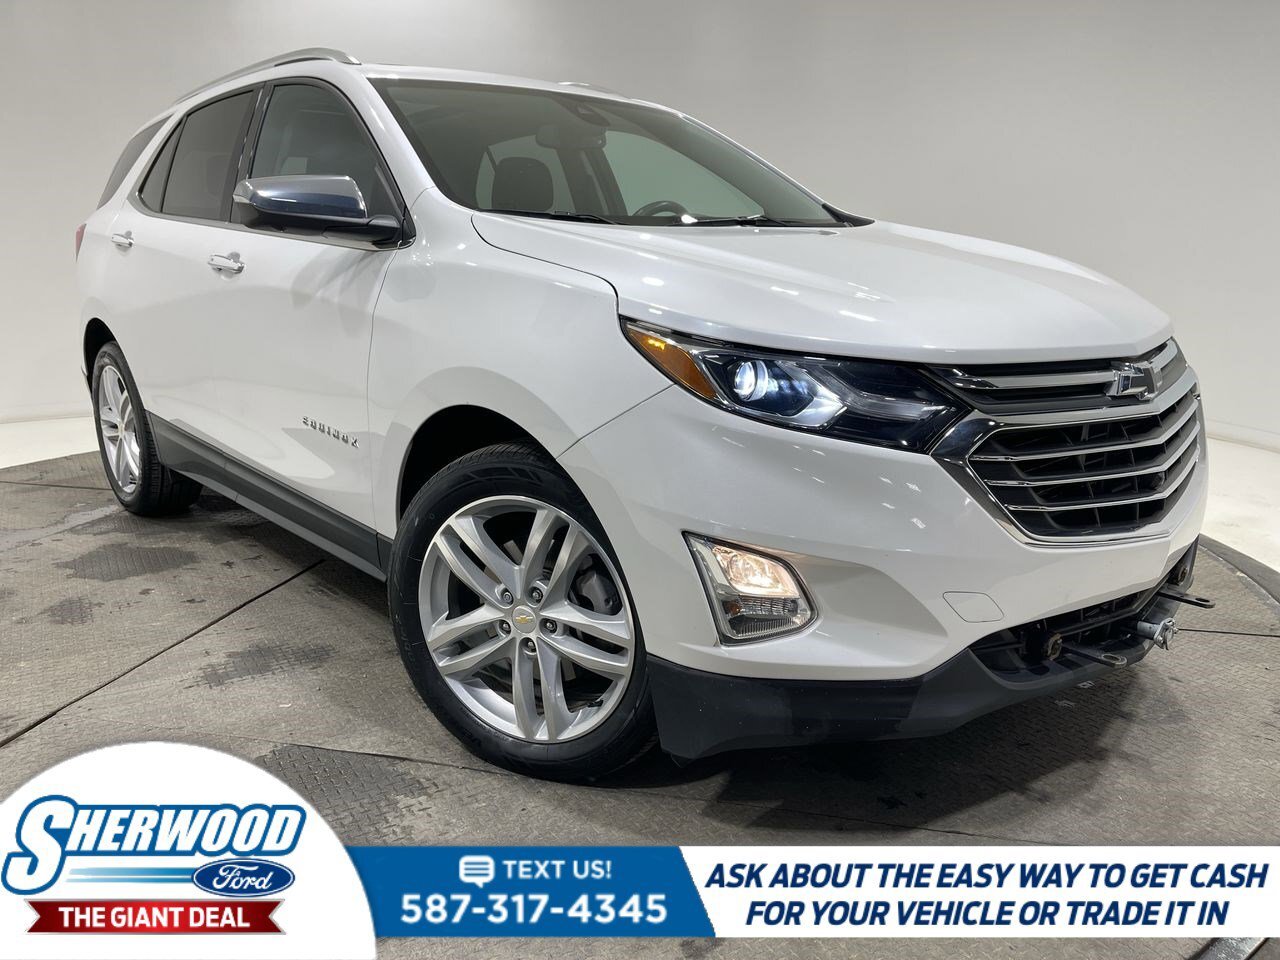 2019 Chevrolet Equinox Premier $0 Down $147 Weekly- NEW TIRES!